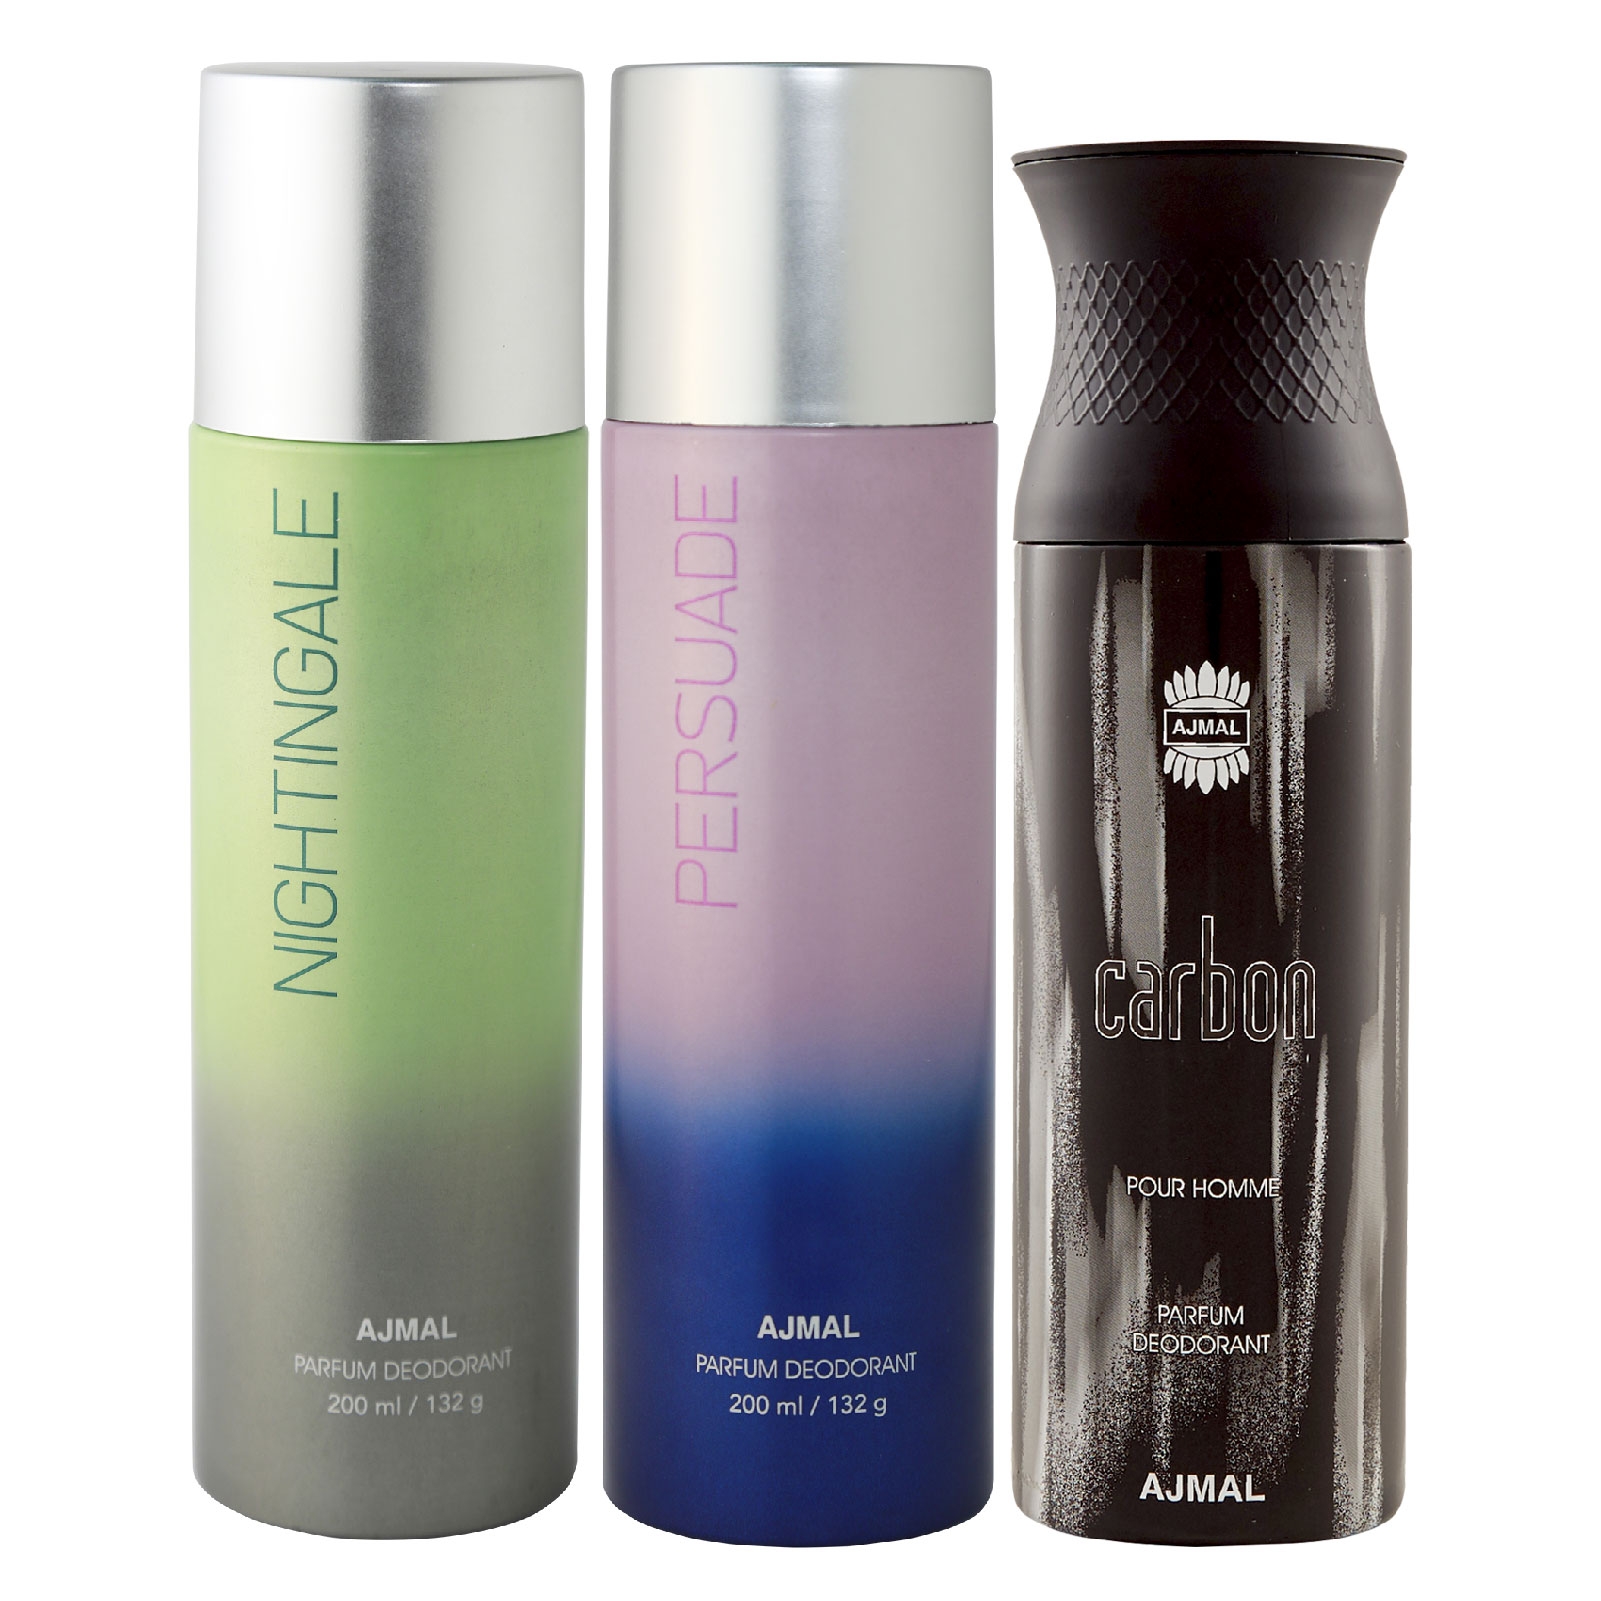 Ajmal | Ajmal Nightingale and Persuade for Men & Women and Carbon for Men High Quality Deodorants each 200ML Combo pack of 3 (Total 600ML) + 3 Parfum Testers